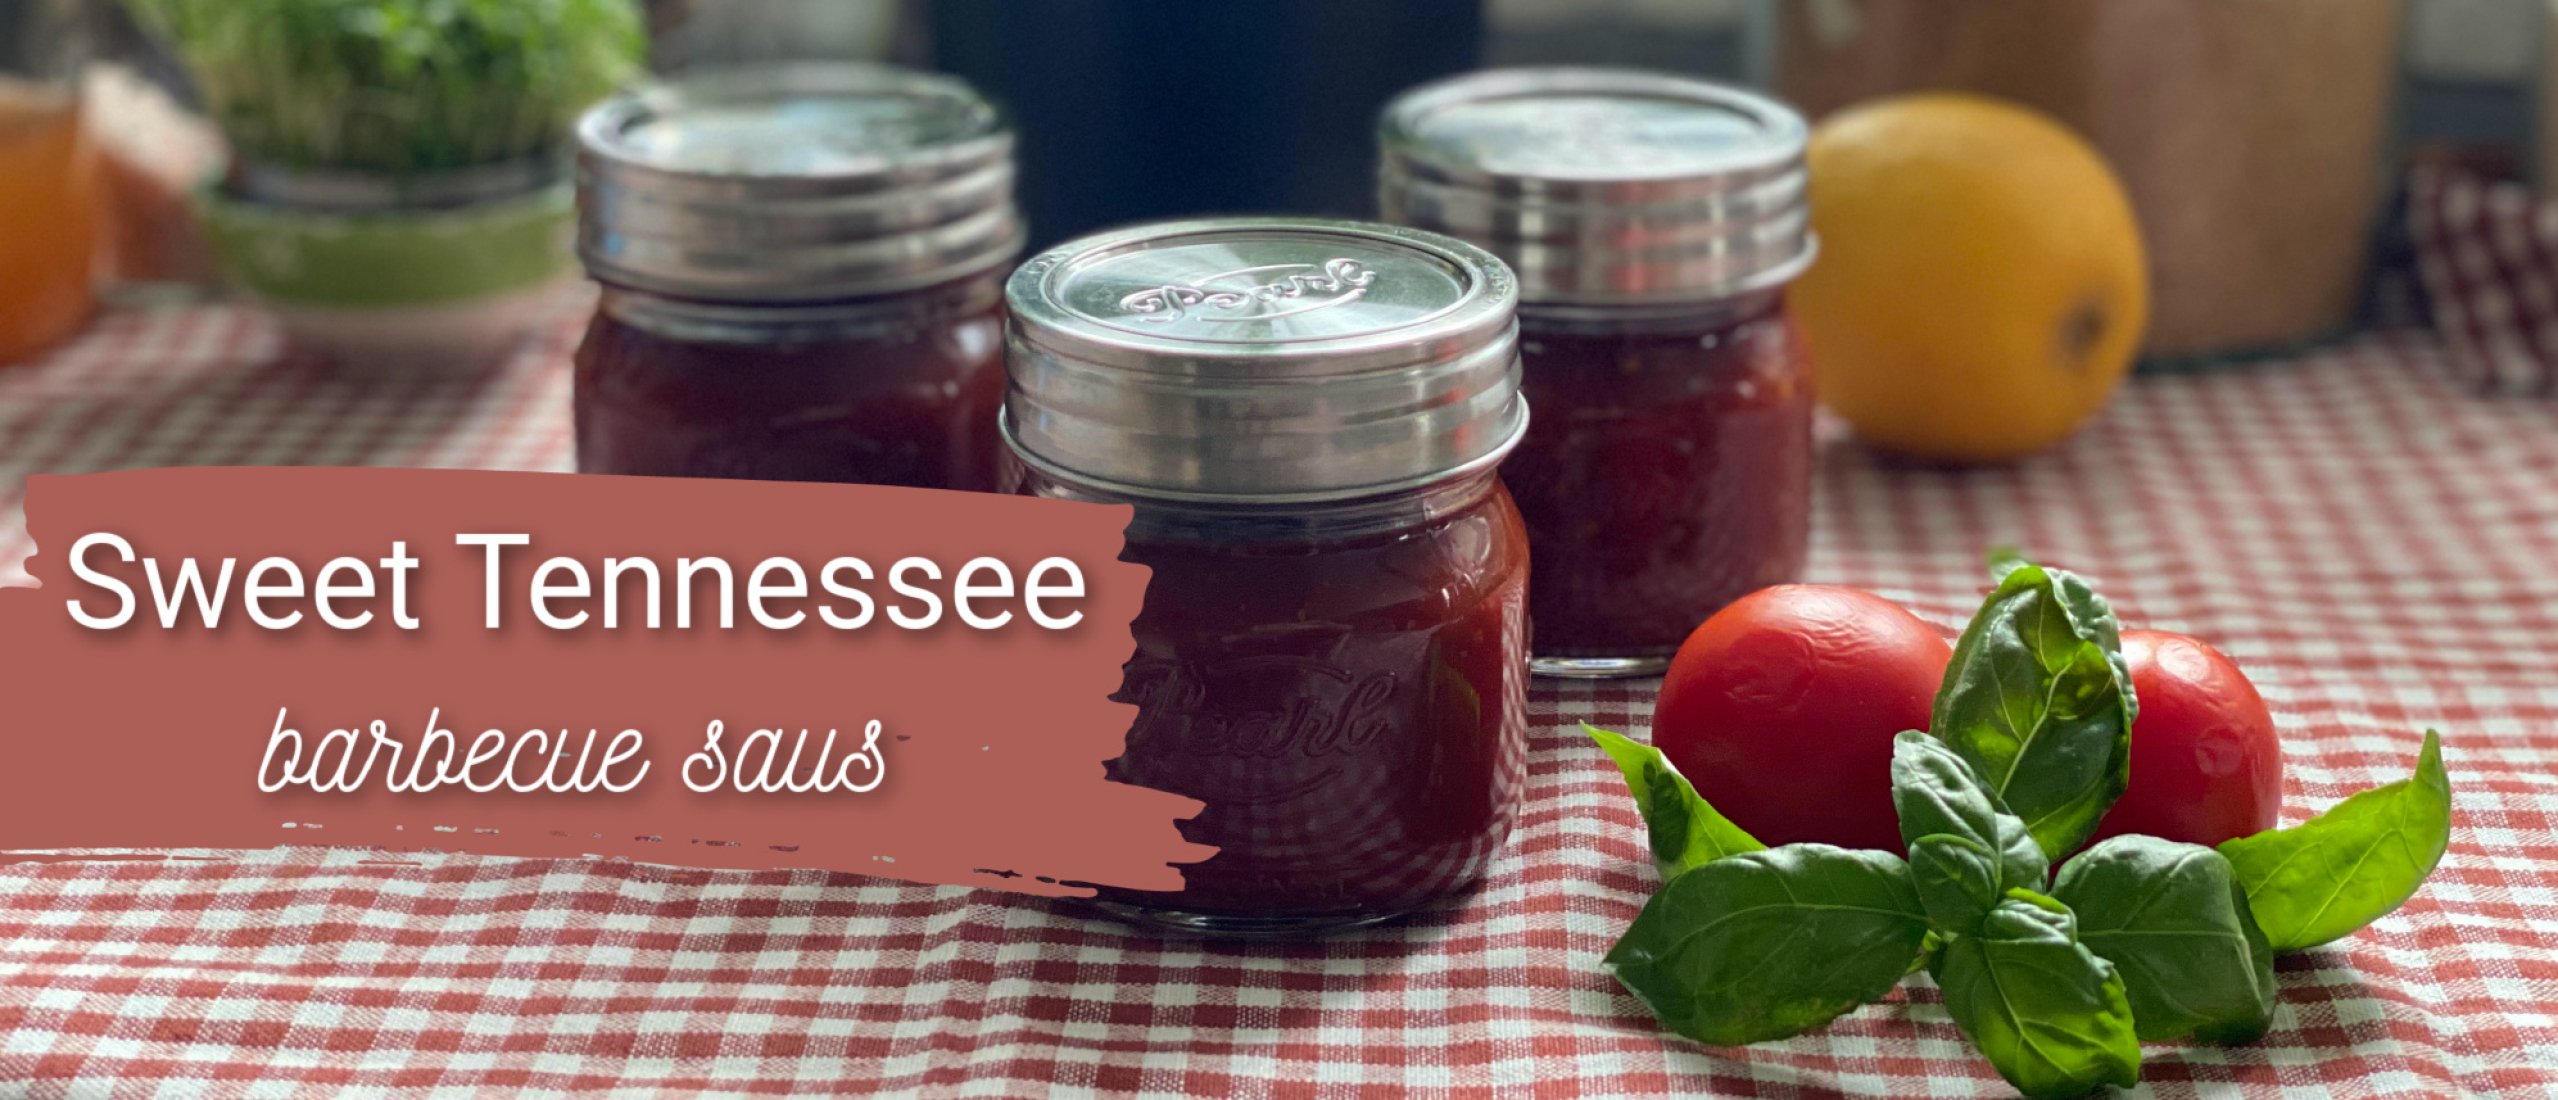 sweet tennessee barbecue saus